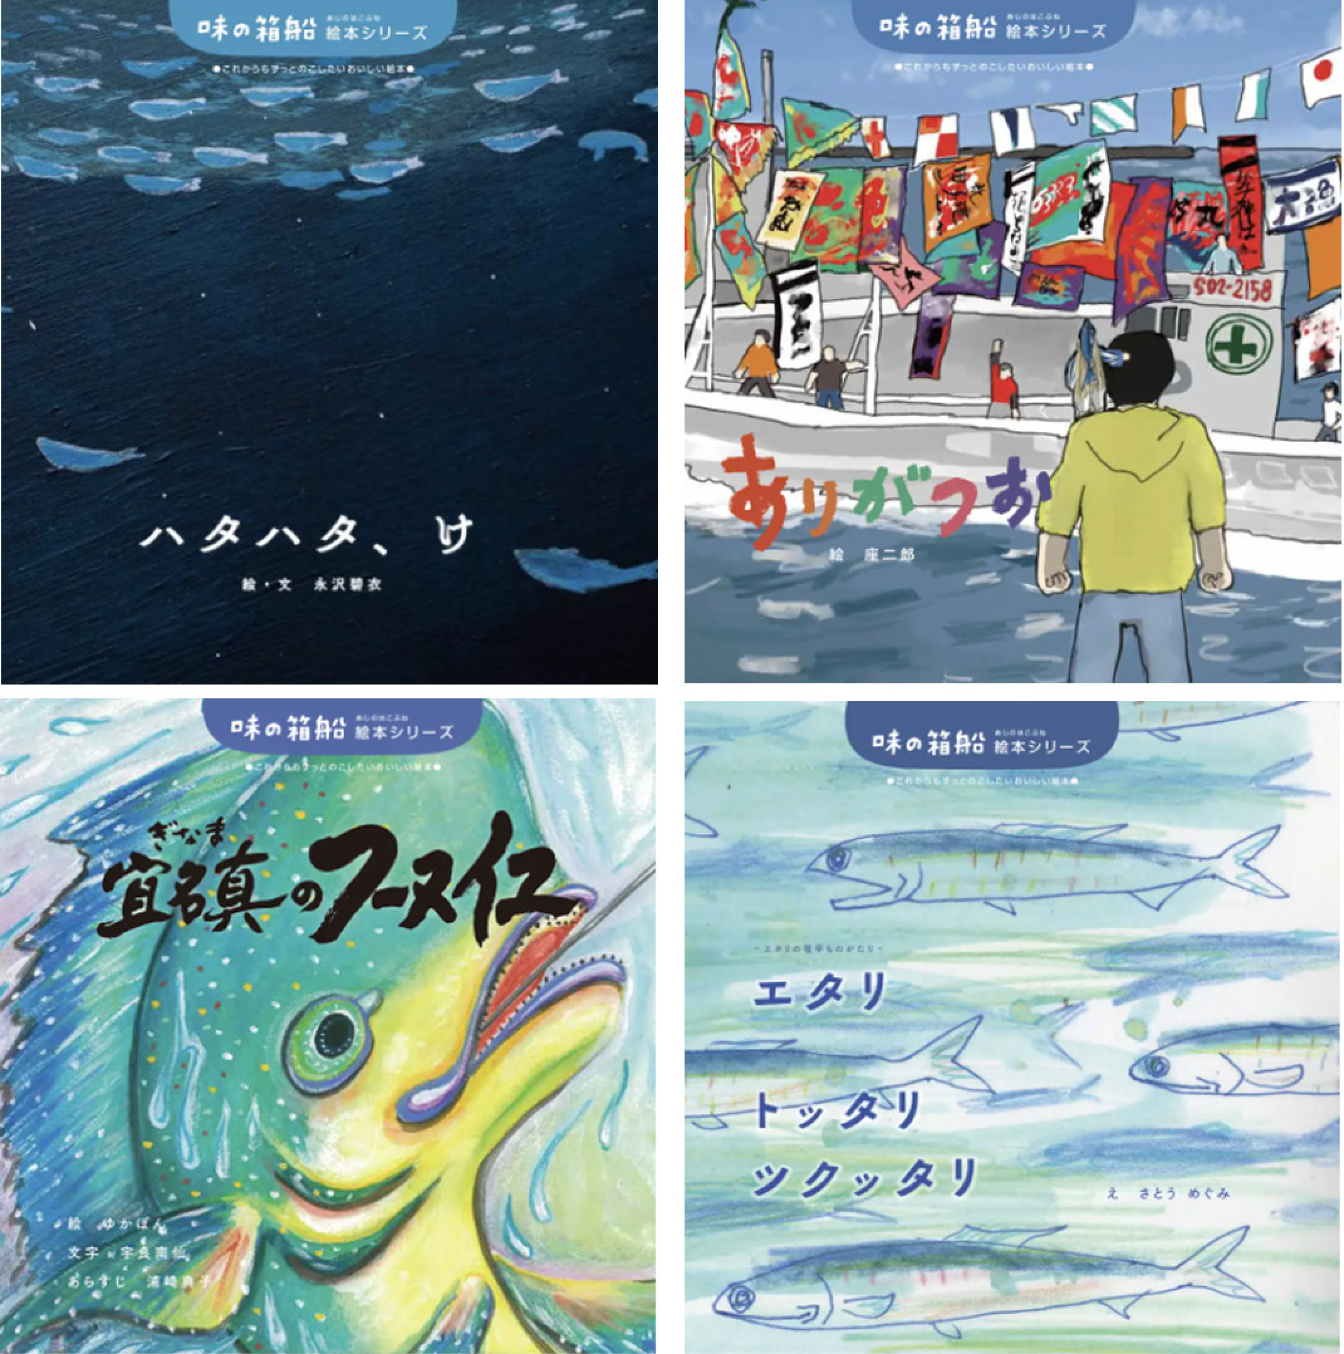 The books cover foodstuffs from four different Japanese prefectures. Clockwise from top left: Akita, Shizuoka, Nagasaki and Okinawa.&nbsp; &nbsp; &nbsp;Source: Slow Food Nippon